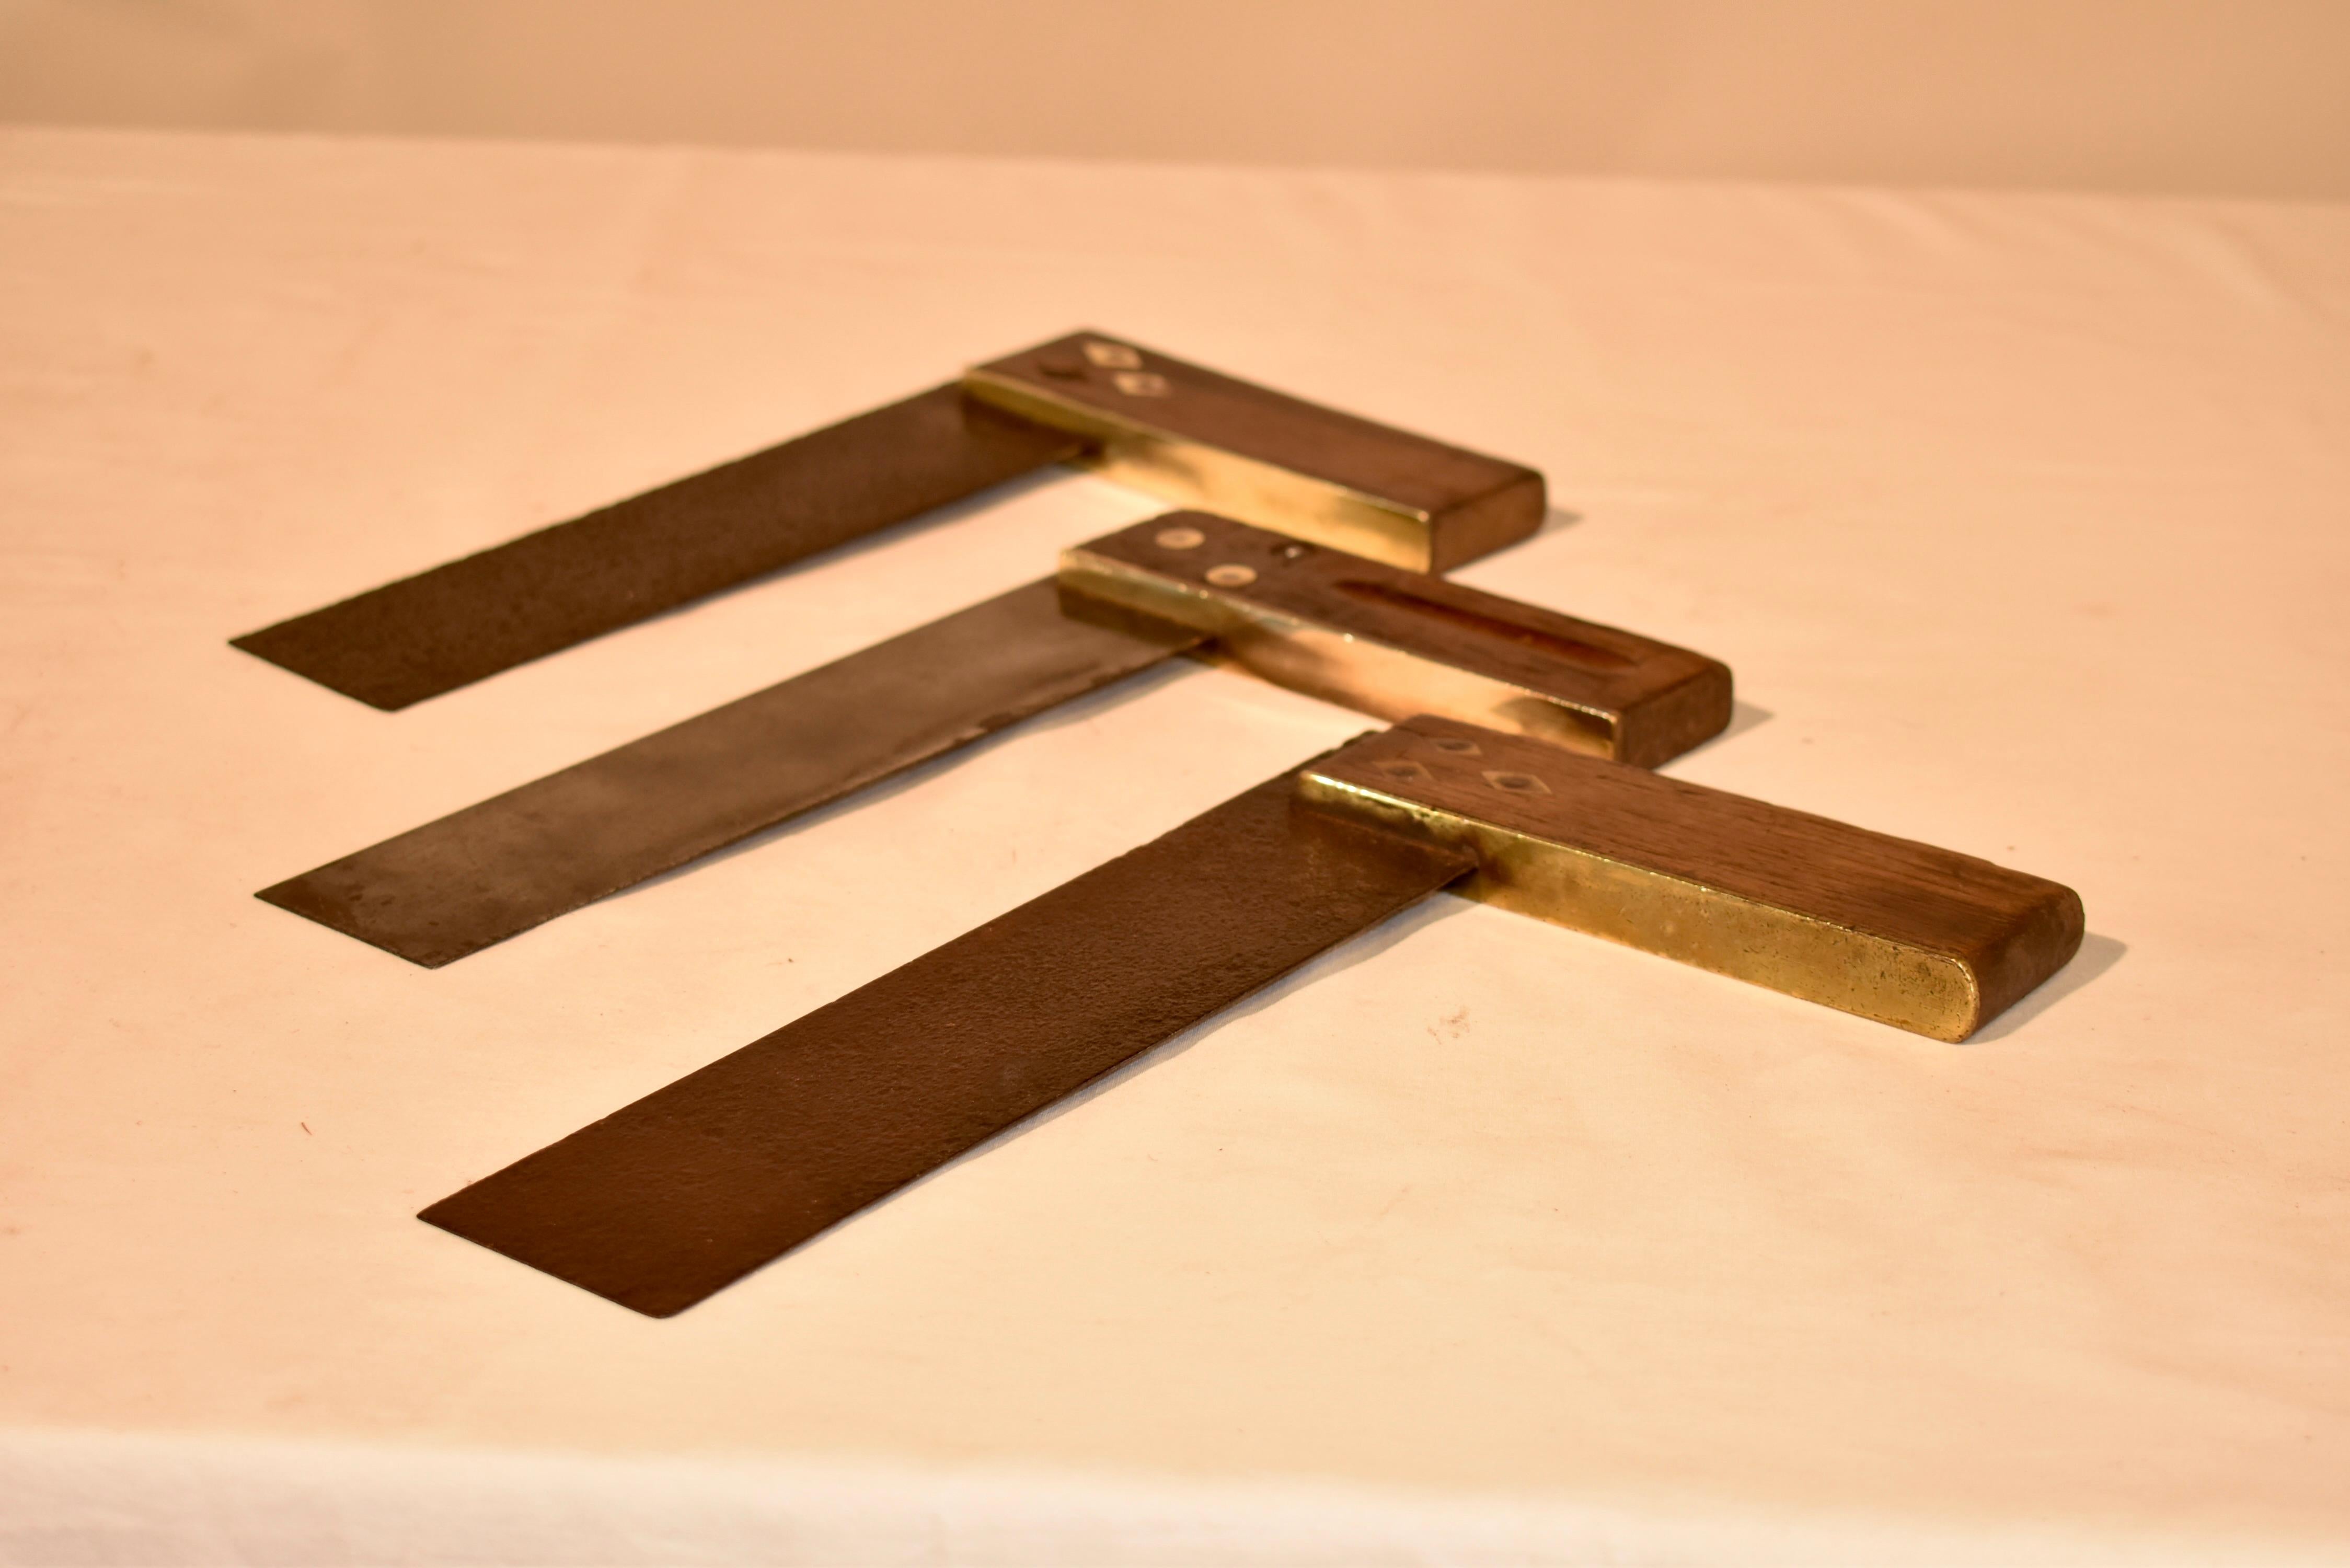 Set of Three Victorian Set Squares, C. 1880 For Sale 3